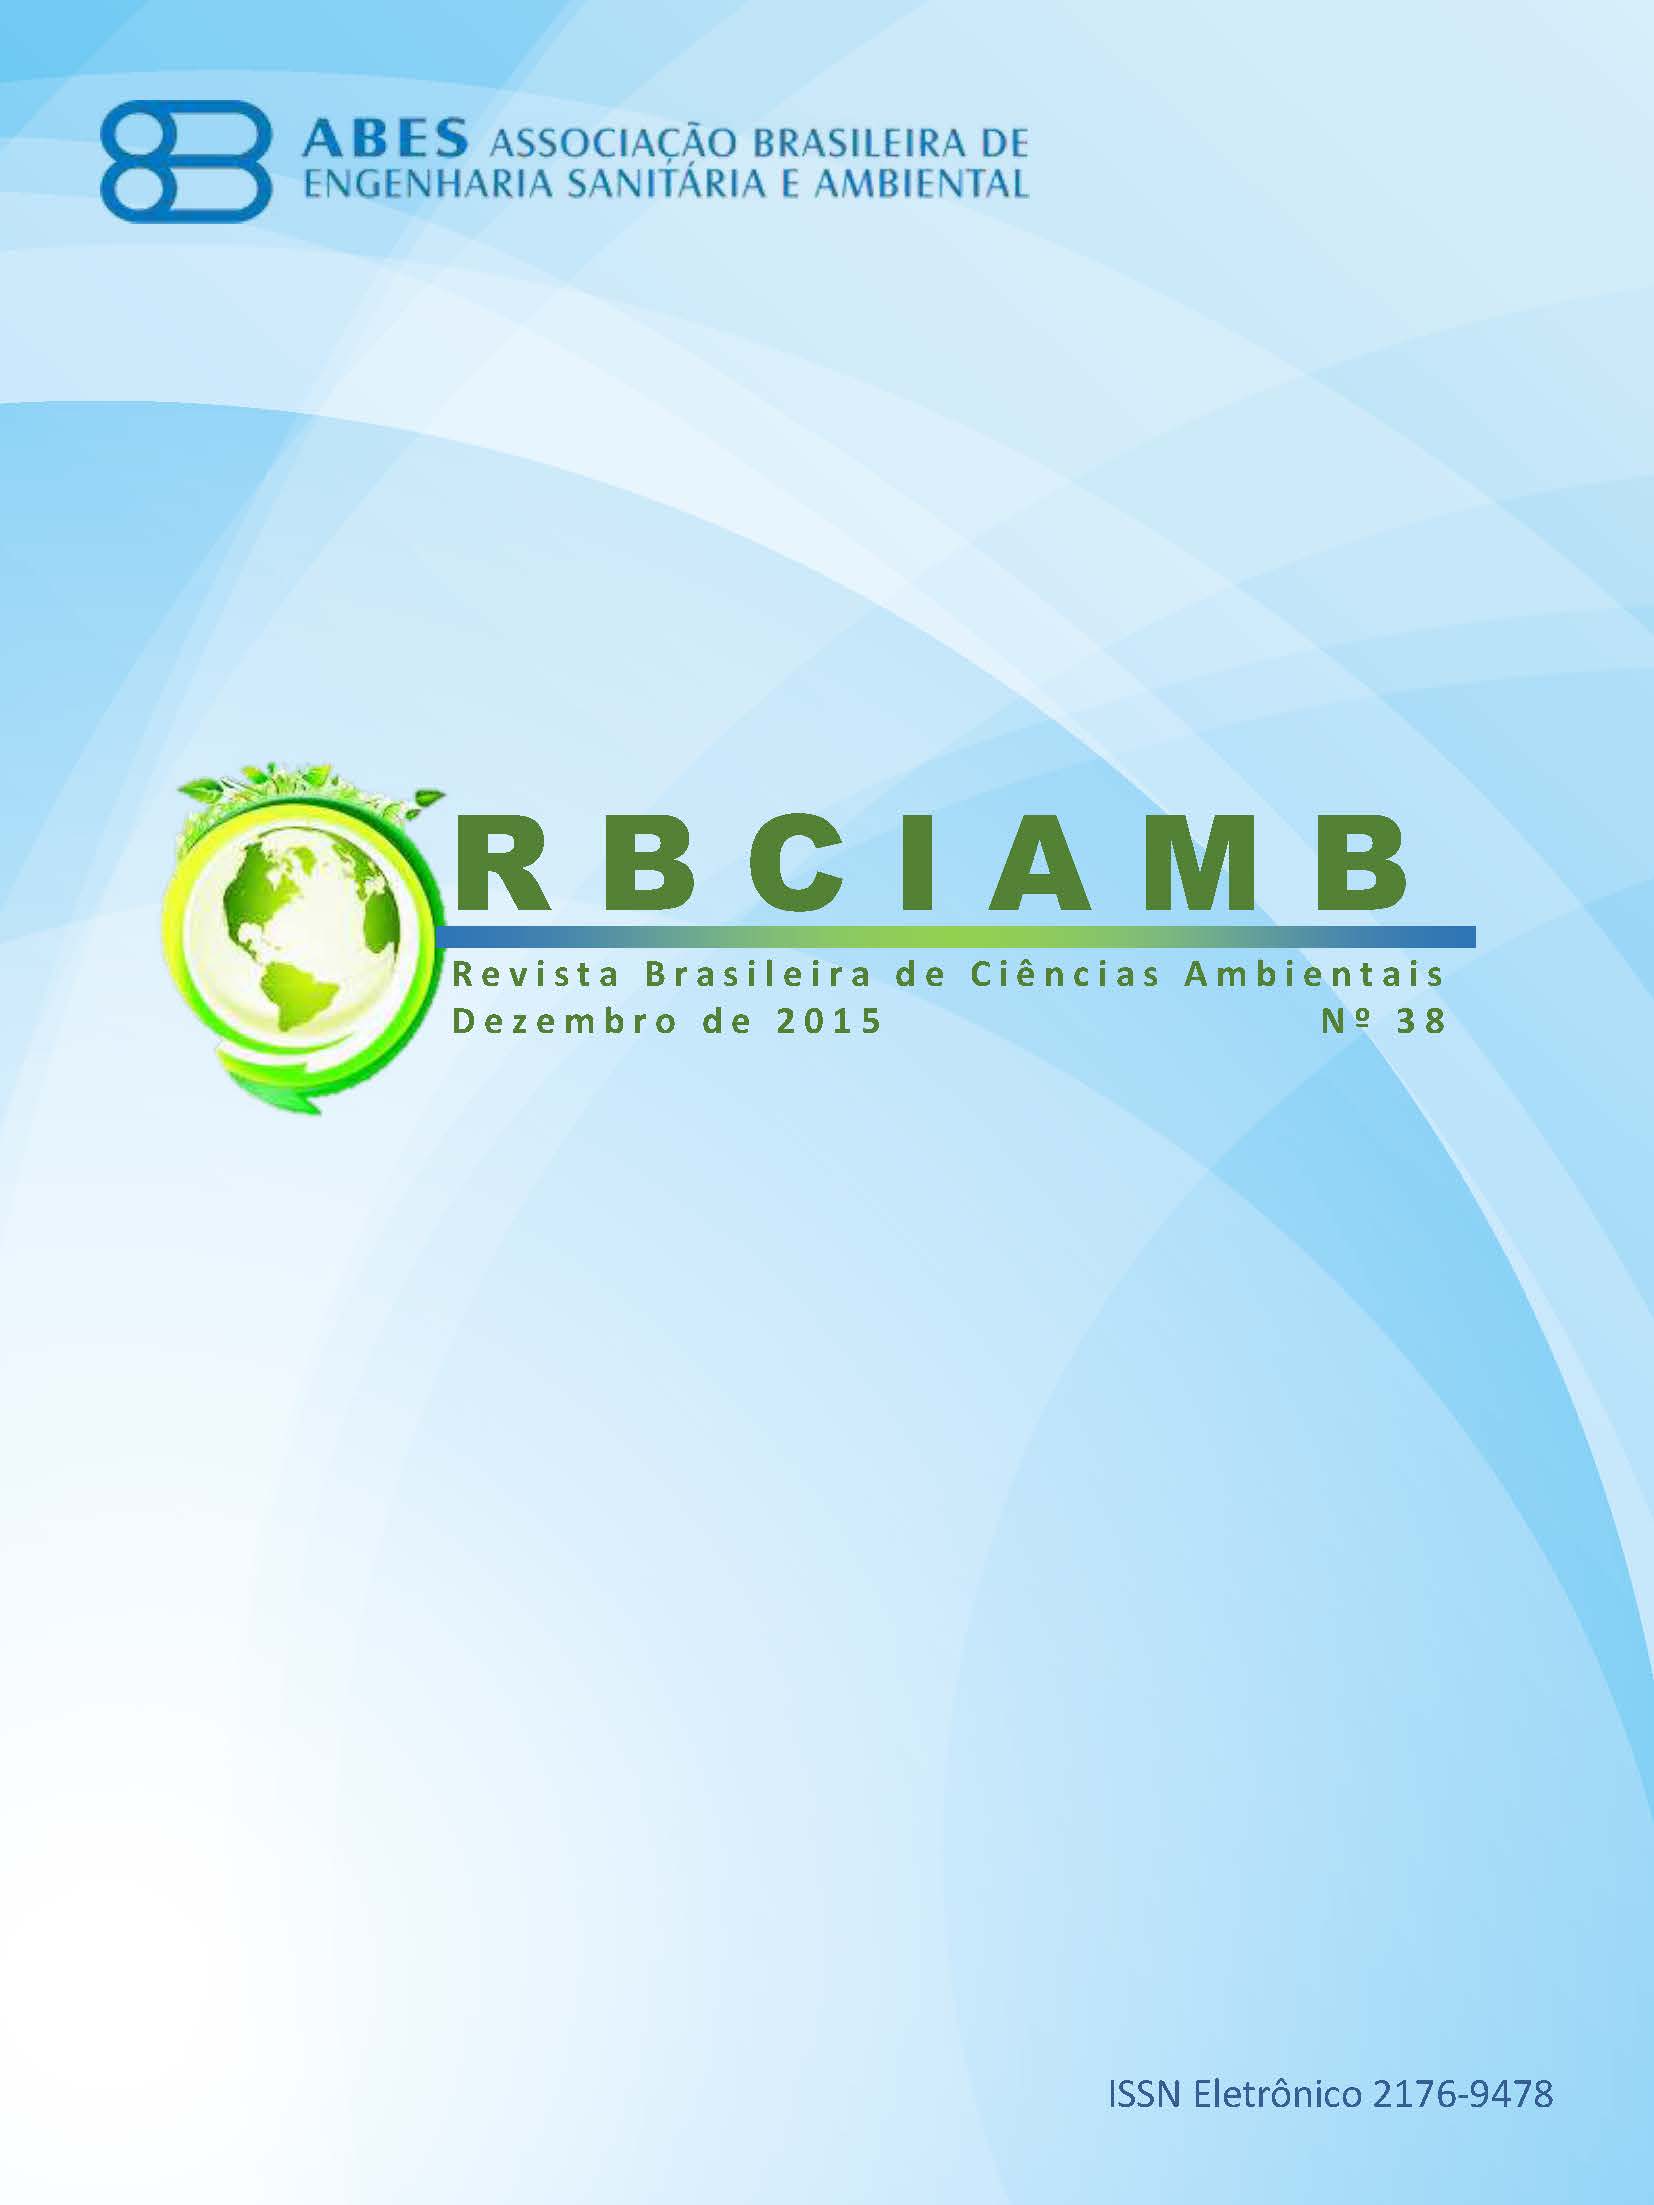 					View No. 38 (2015): RBCIAMB - ISSN 2176-9478 - December
				